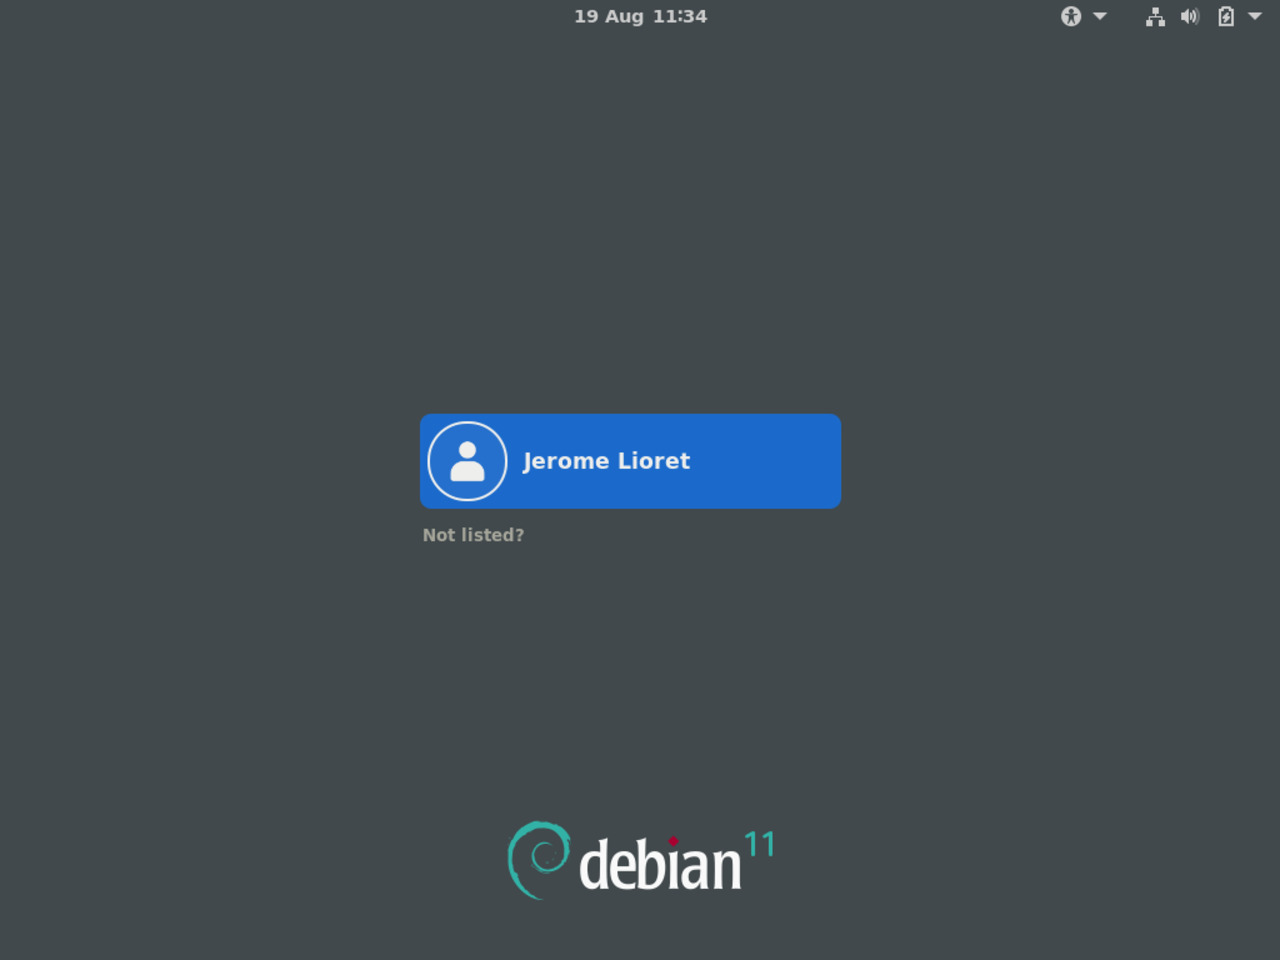 My first Linux laptop - First graphical login with the minimal Gnome environment installed on top of Debian